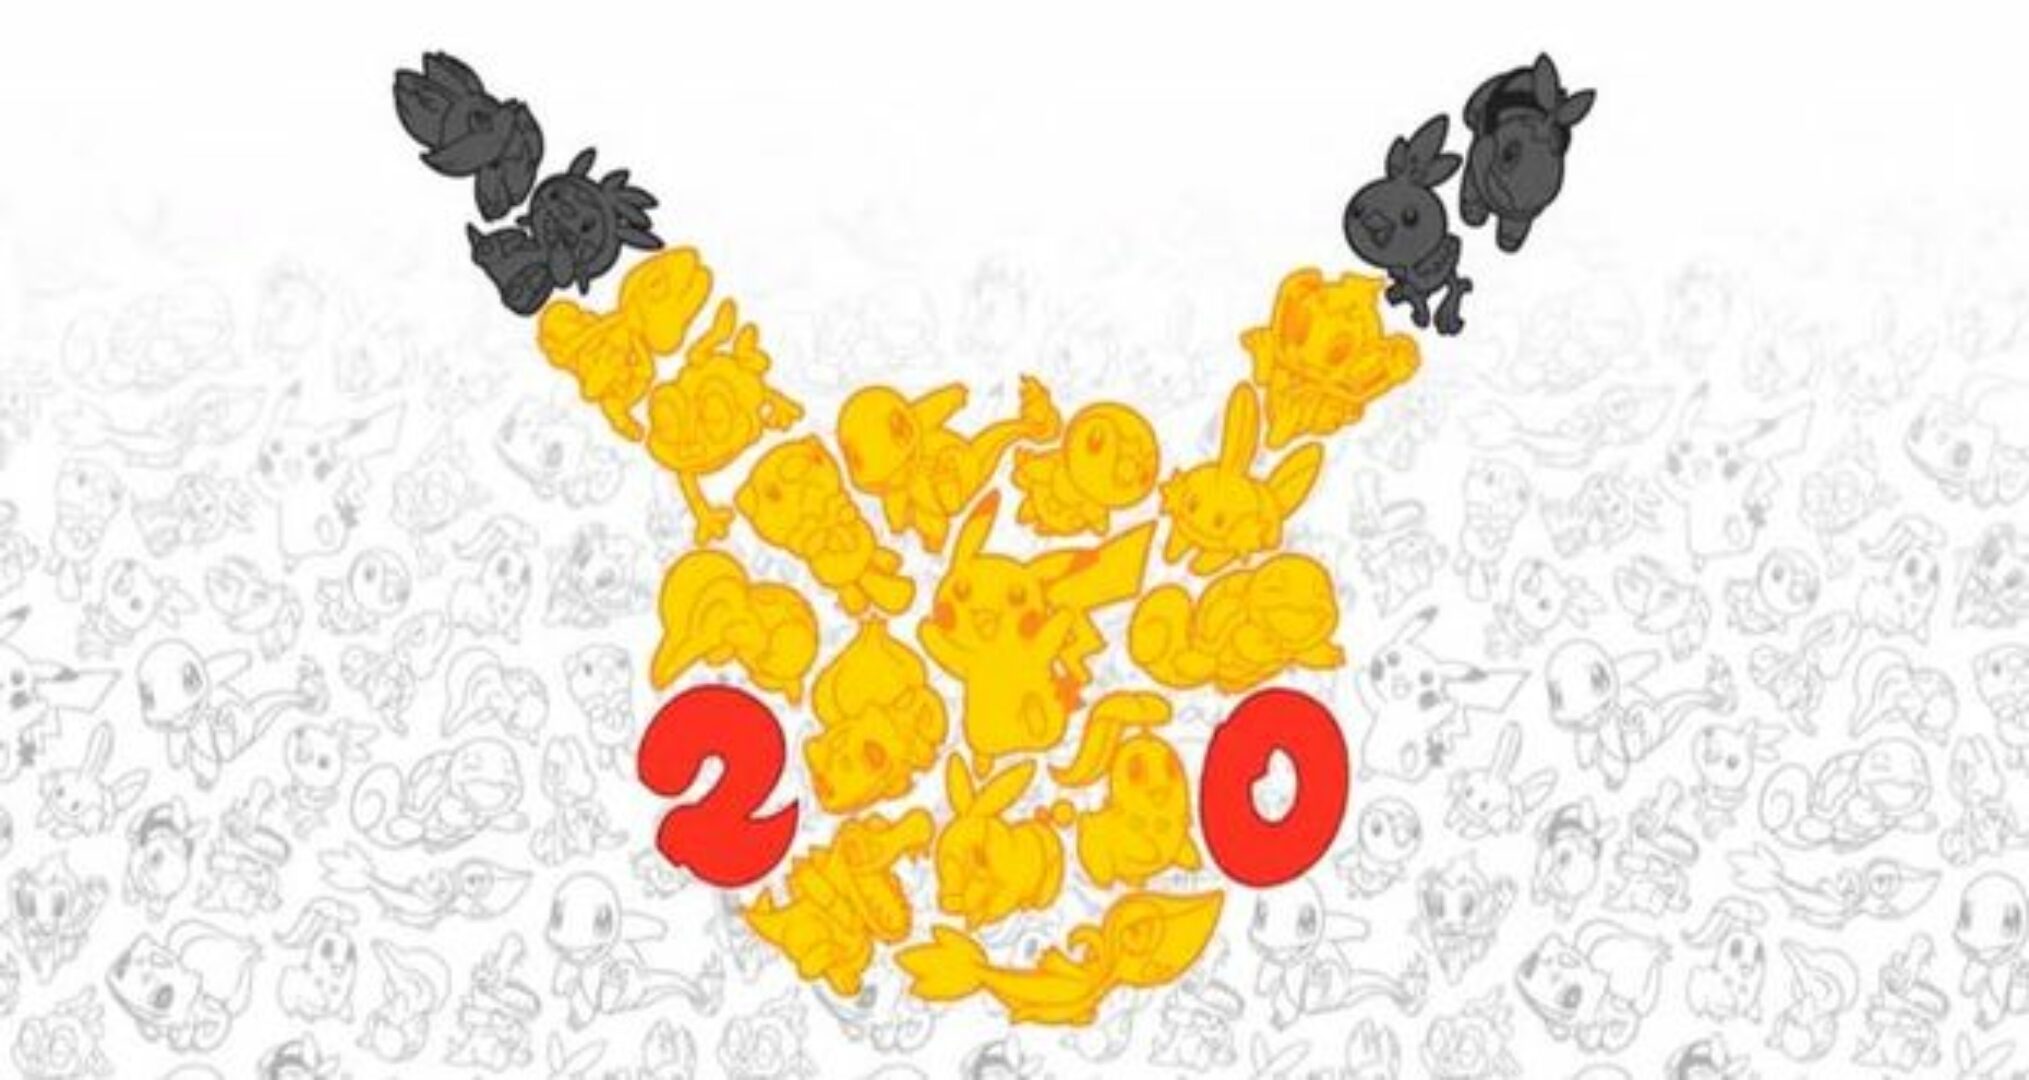 Pokémon Turns 20 Years Old, and We Get Presents